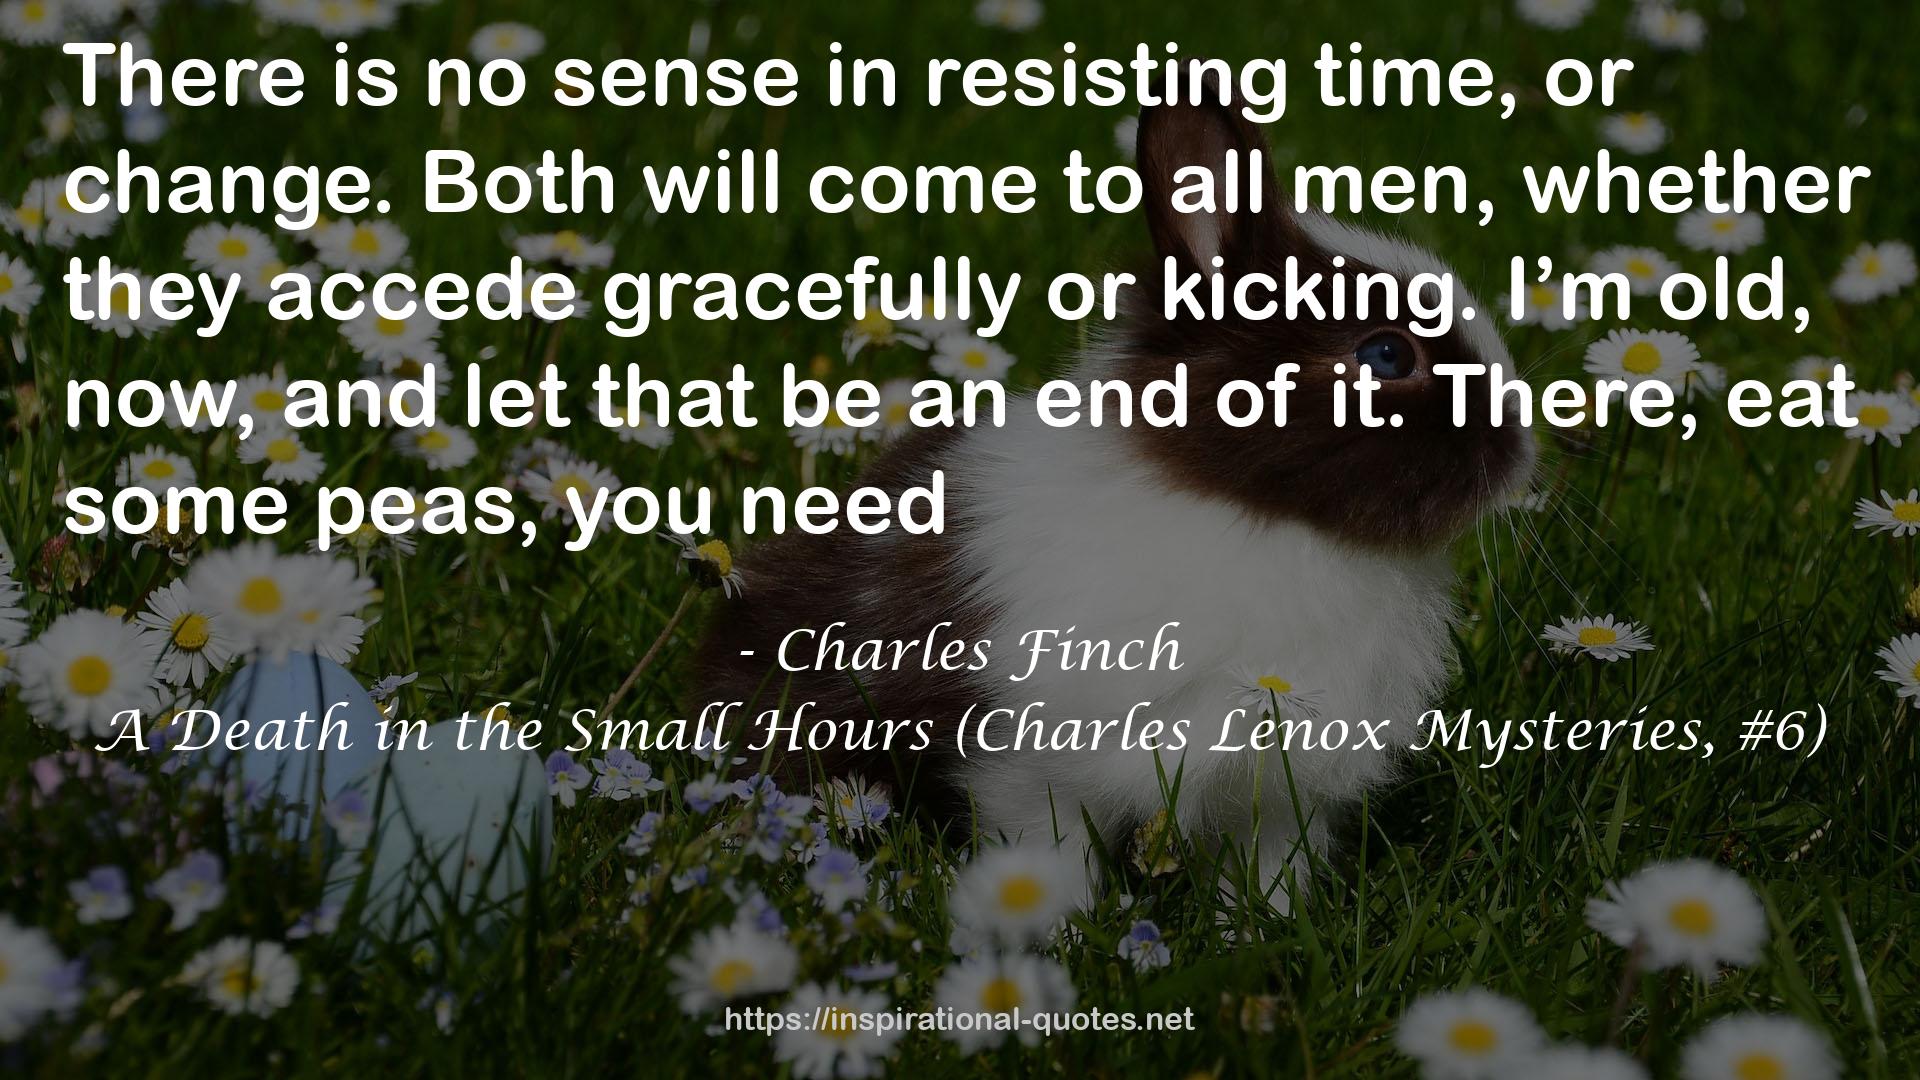 Charles Finch QUOTES